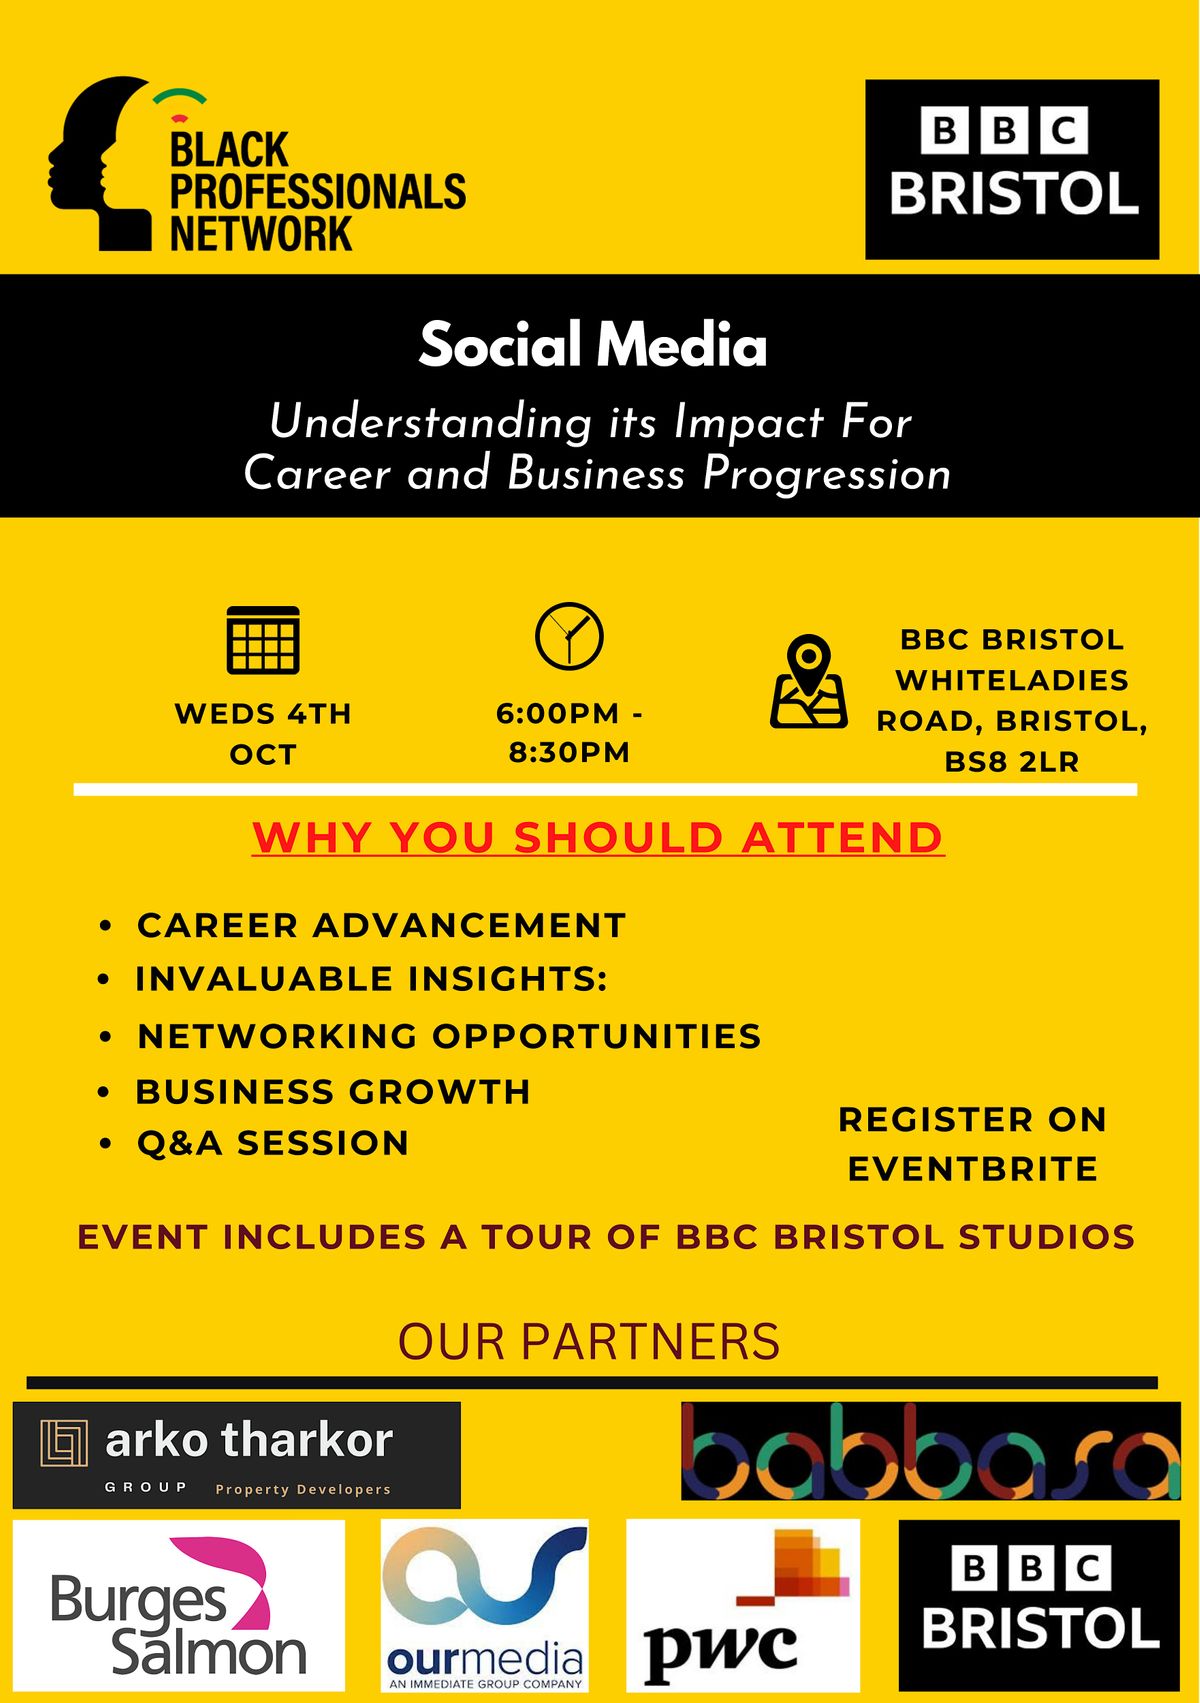 Social Media - Understanding its Impact For Career and Business Progression